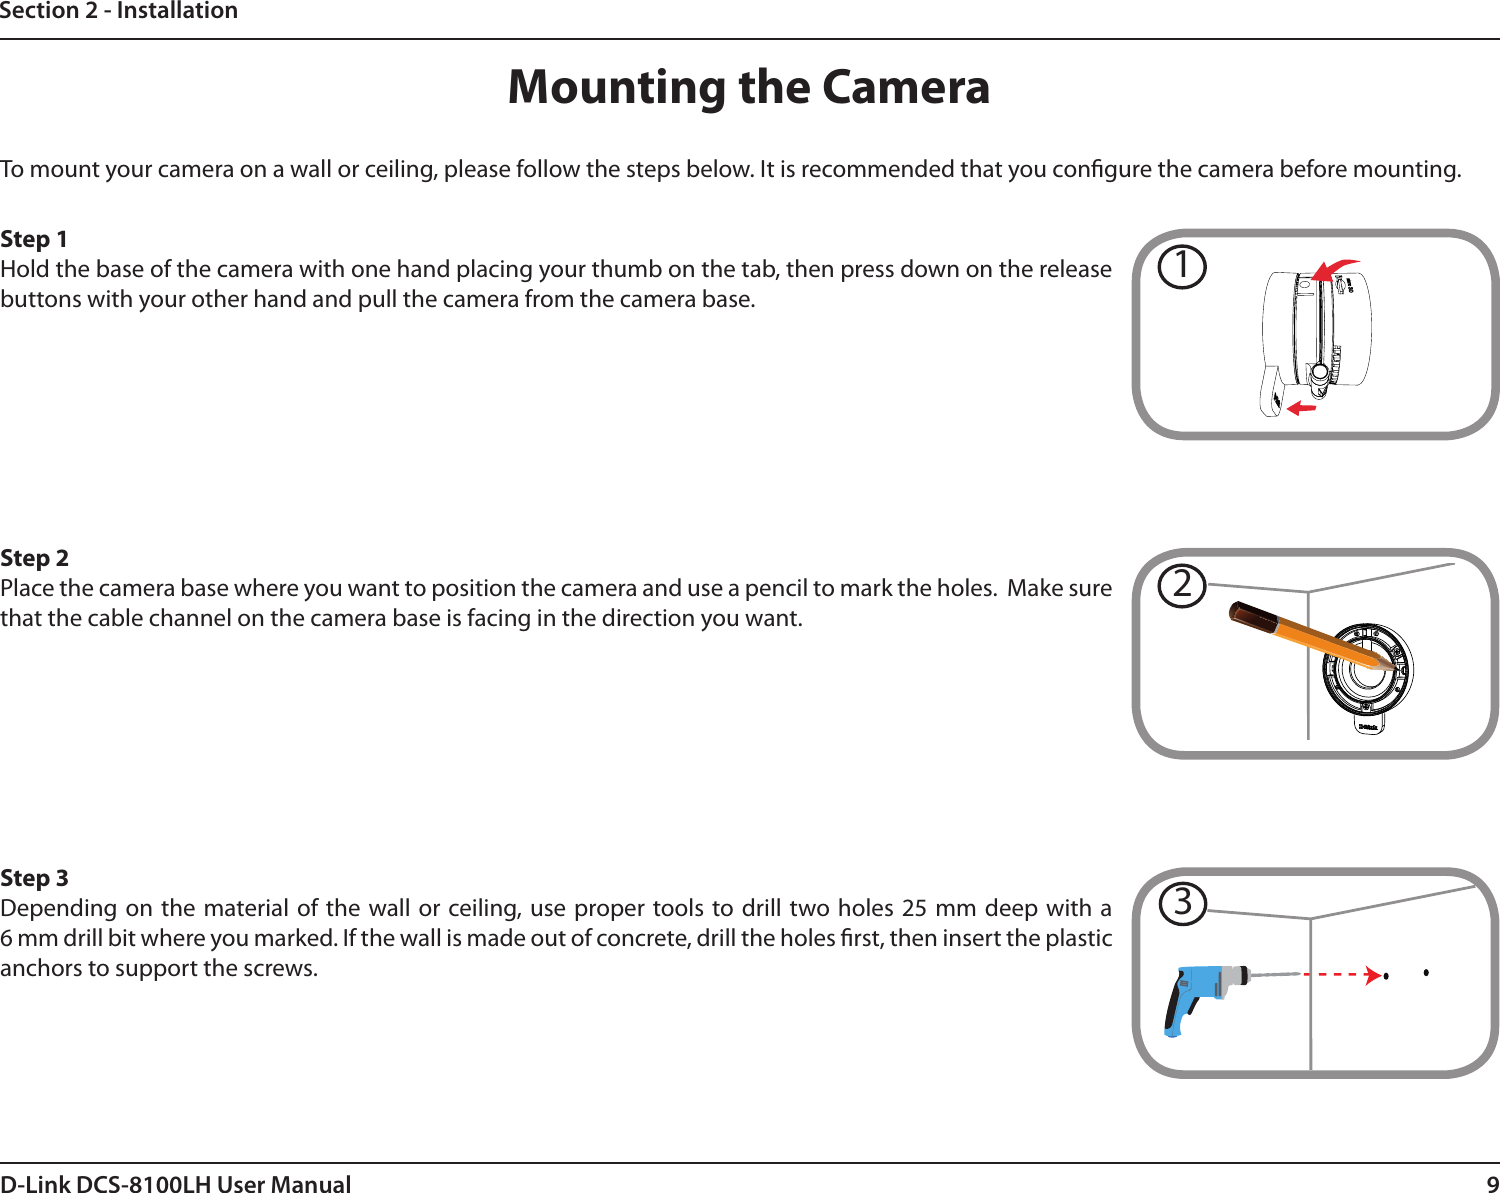 9D-Link DCS-8100LH User ManualSection 2 - InstallationMounting the CameraTo mount your camera on a wall or ceiling, please follow the steps below. It is recommended that you congure the camera before mounting.Step 1Hold the base of the camera with one hand placing your thumb on the tab, then press down on the release buttons with your other hand and pull the camera from the camera base.Step 3Depending on the material of the wall or ceiling, use proper tools to drill two holes 25 mm deep with a  6 mm drill bit where you marked. If the wall is made out of concrete, drill the holes rst, then insert the plastic anchors to support the screws.Step 2Place the camera base where you want to position the camera and use a pencil to mark the holes.  Make sure that the cable channel on the camera base is facing in the direction you want.312